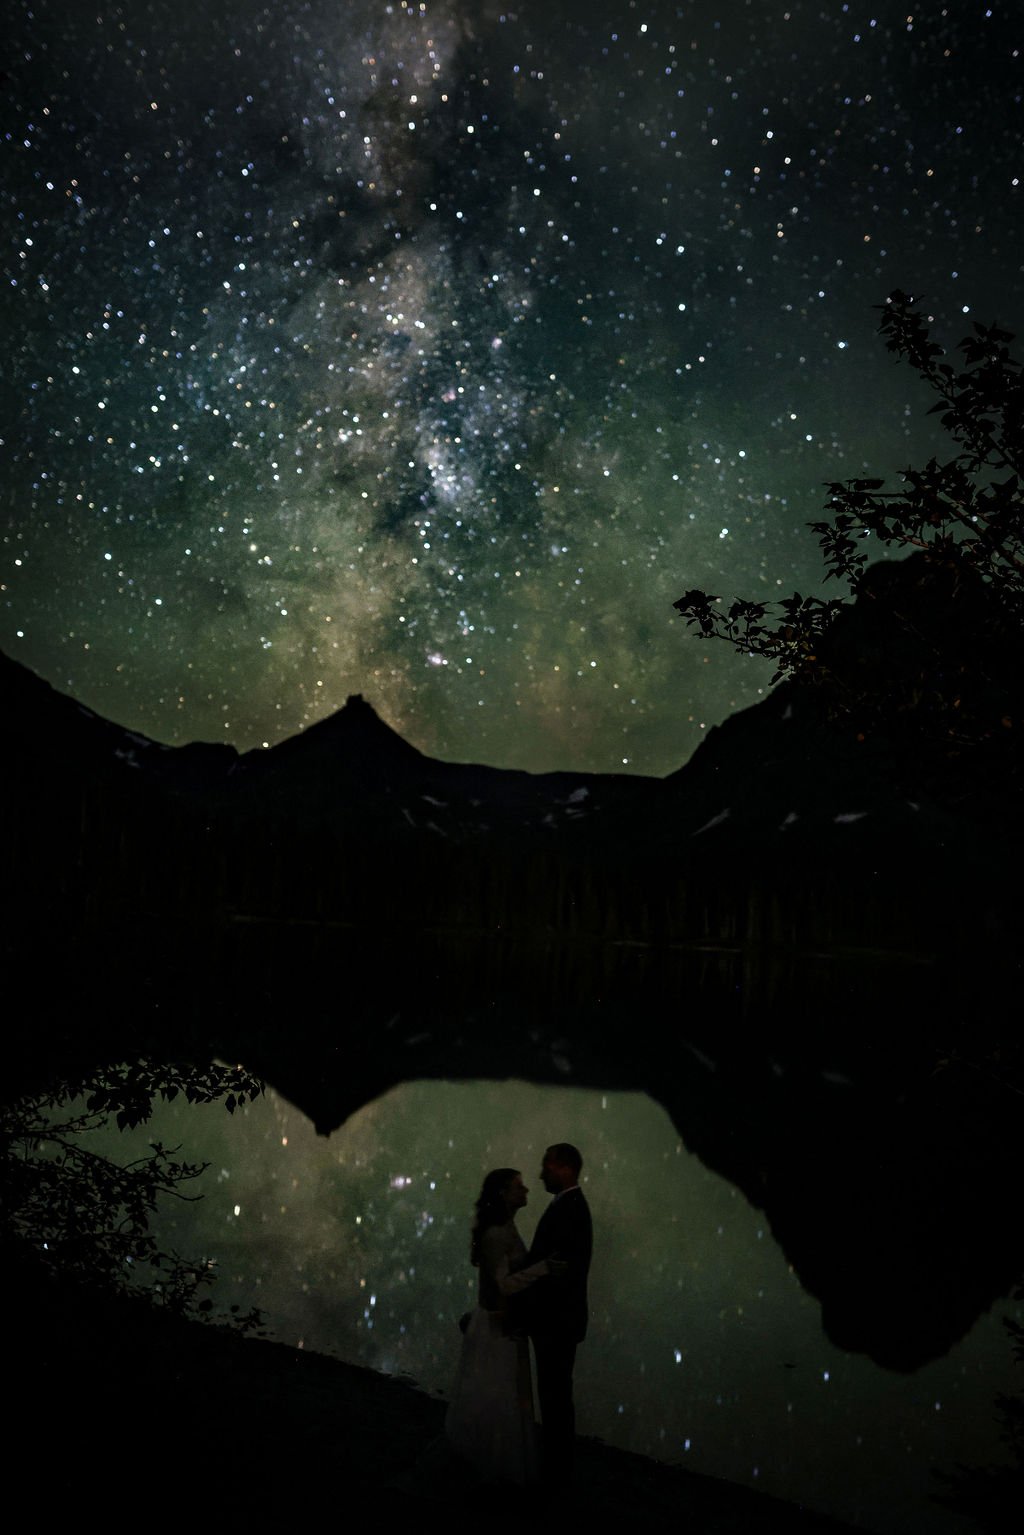 Glacier park bride and groom with milky way galaxy reflecting in st mary's lake.jpg